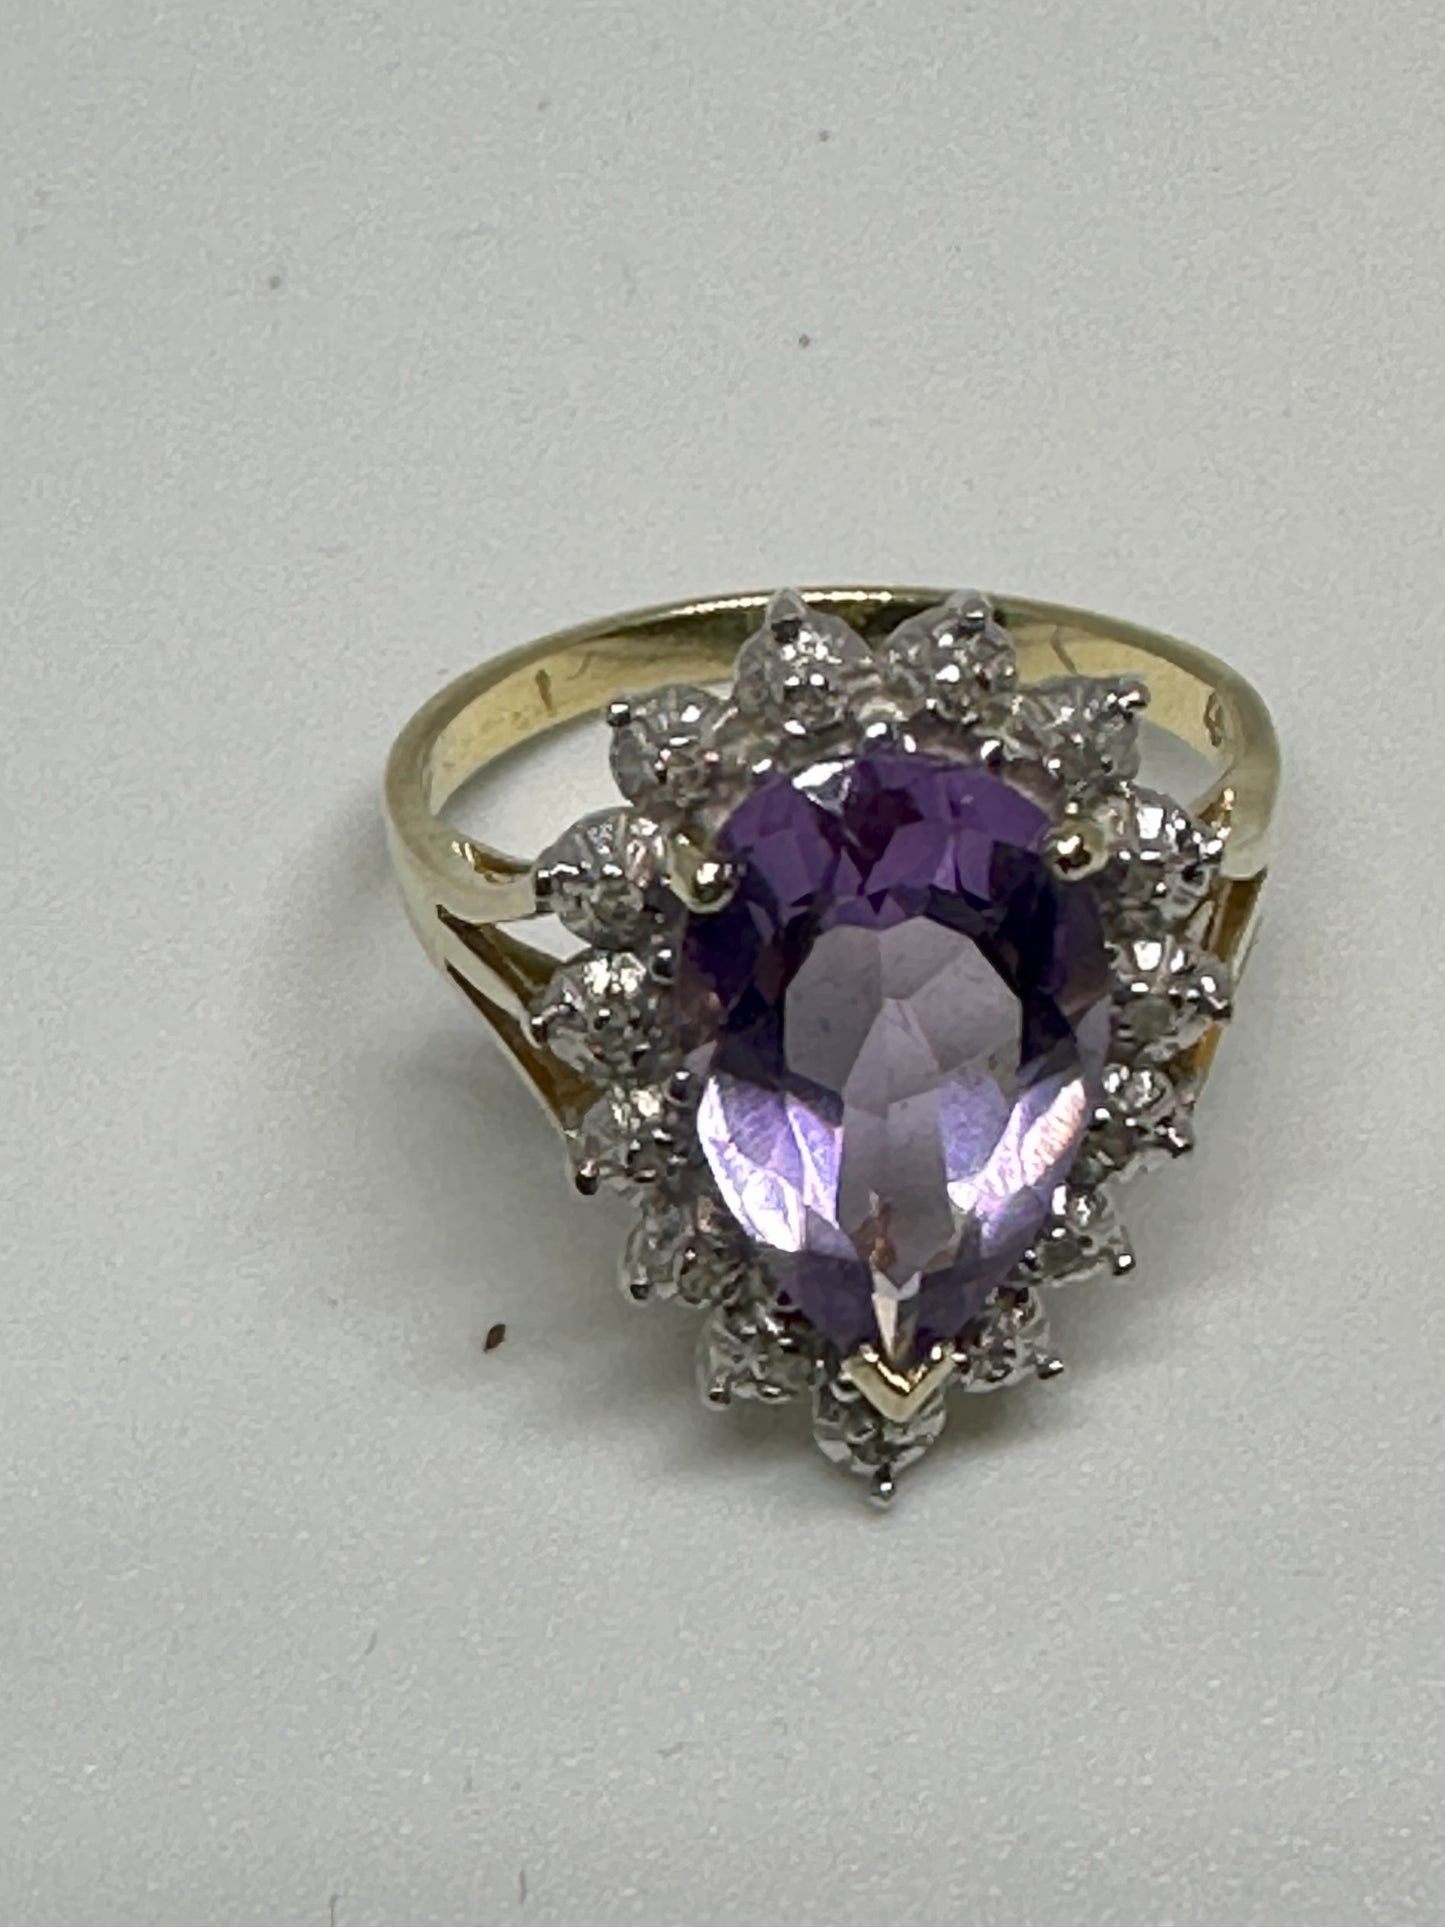 Vintage Pear Shaped Cut Amethyst 14K Yellow Gold Ring w/ 9K White Gold and Diamonds Surround